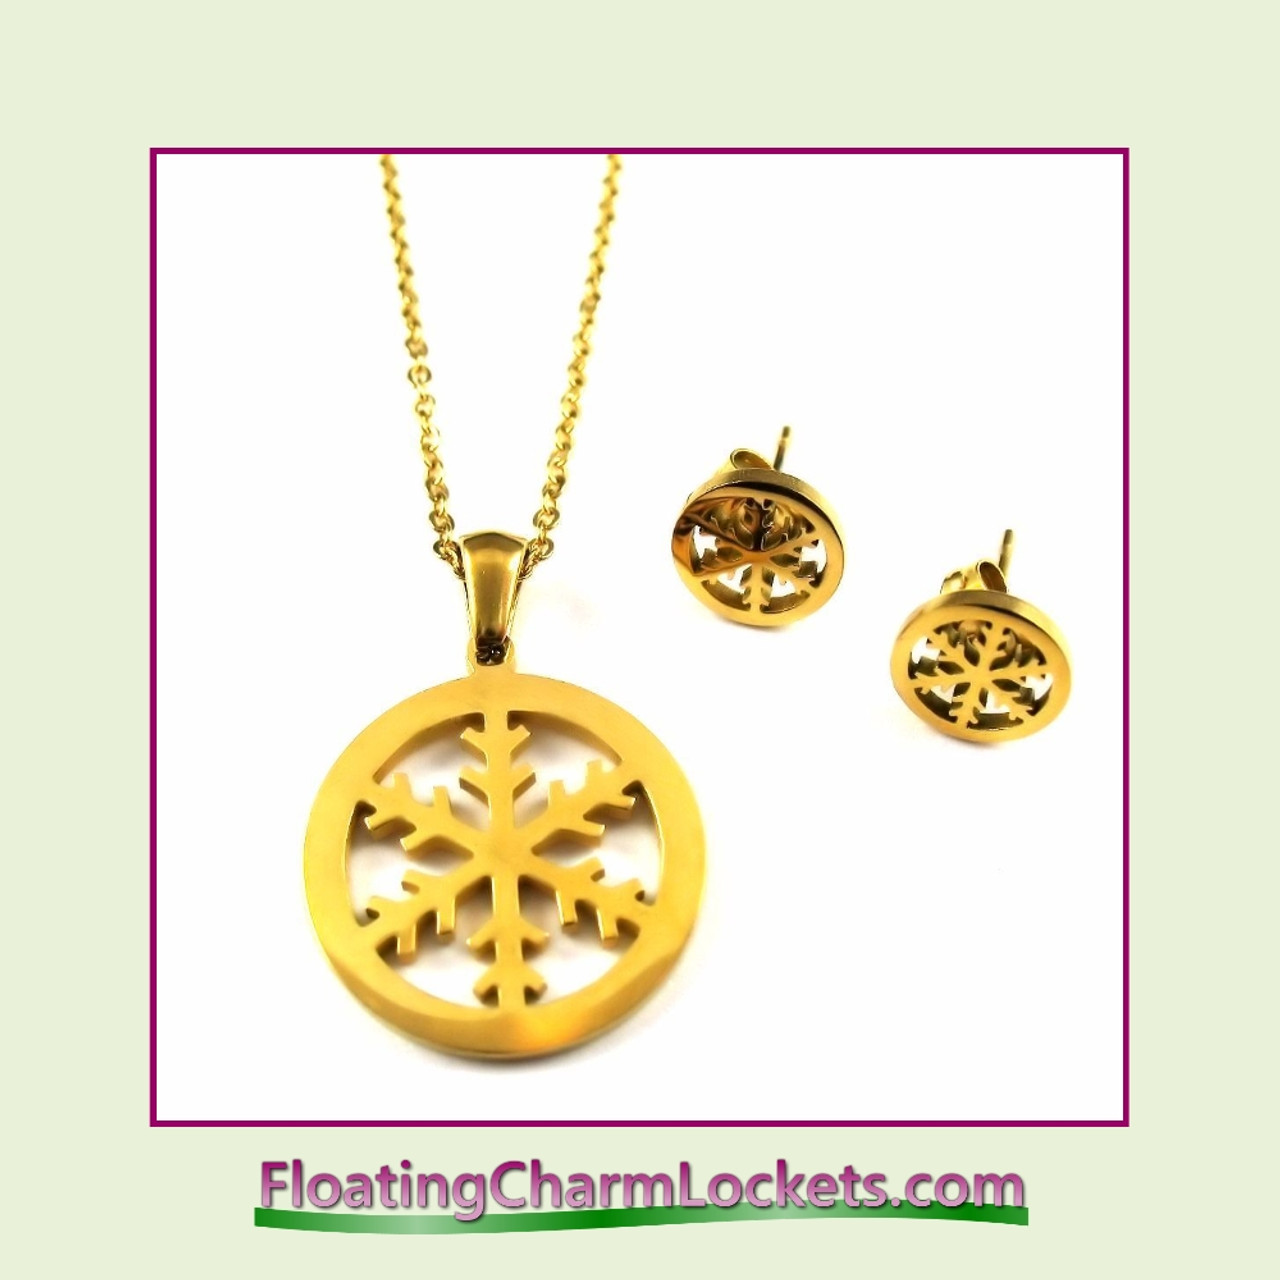 Stainless Steel Jewelry Set - Snowflake Pendant and Earrings (Gold)